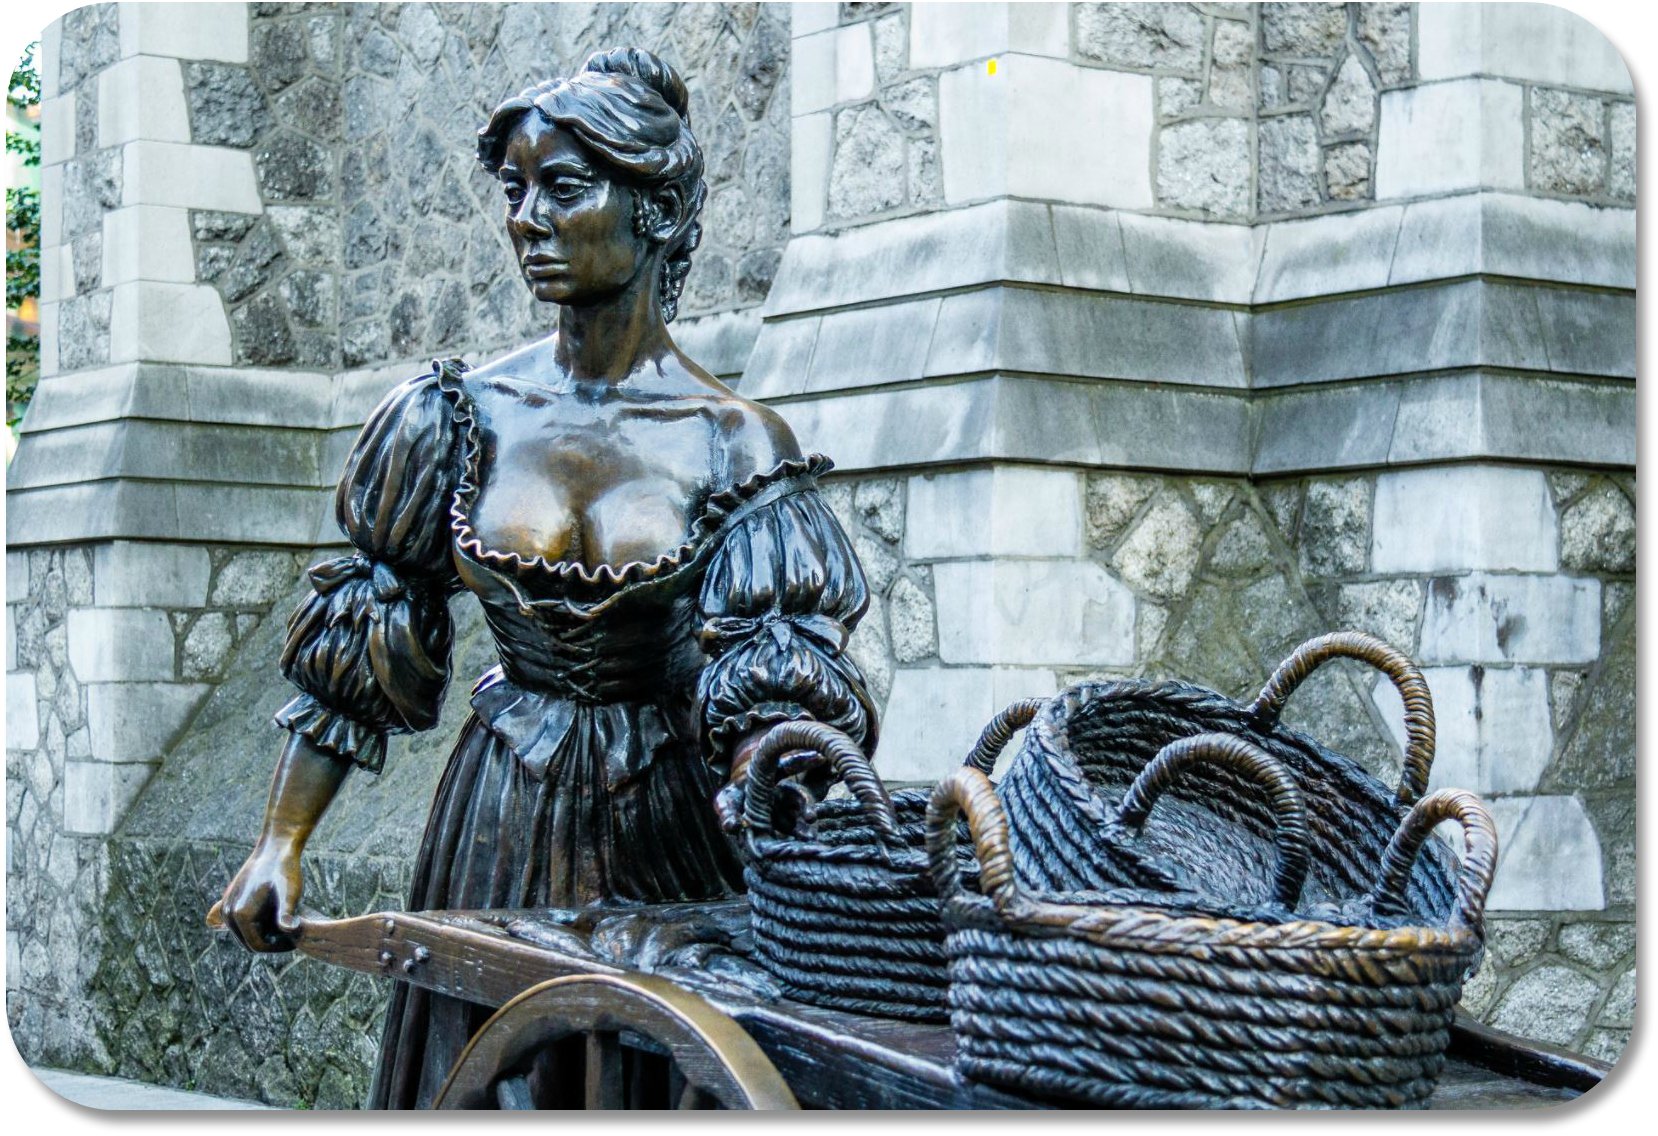 Irish Expressions - Molly Malone Statue photocredit Marcial Bernabeau via Flickr